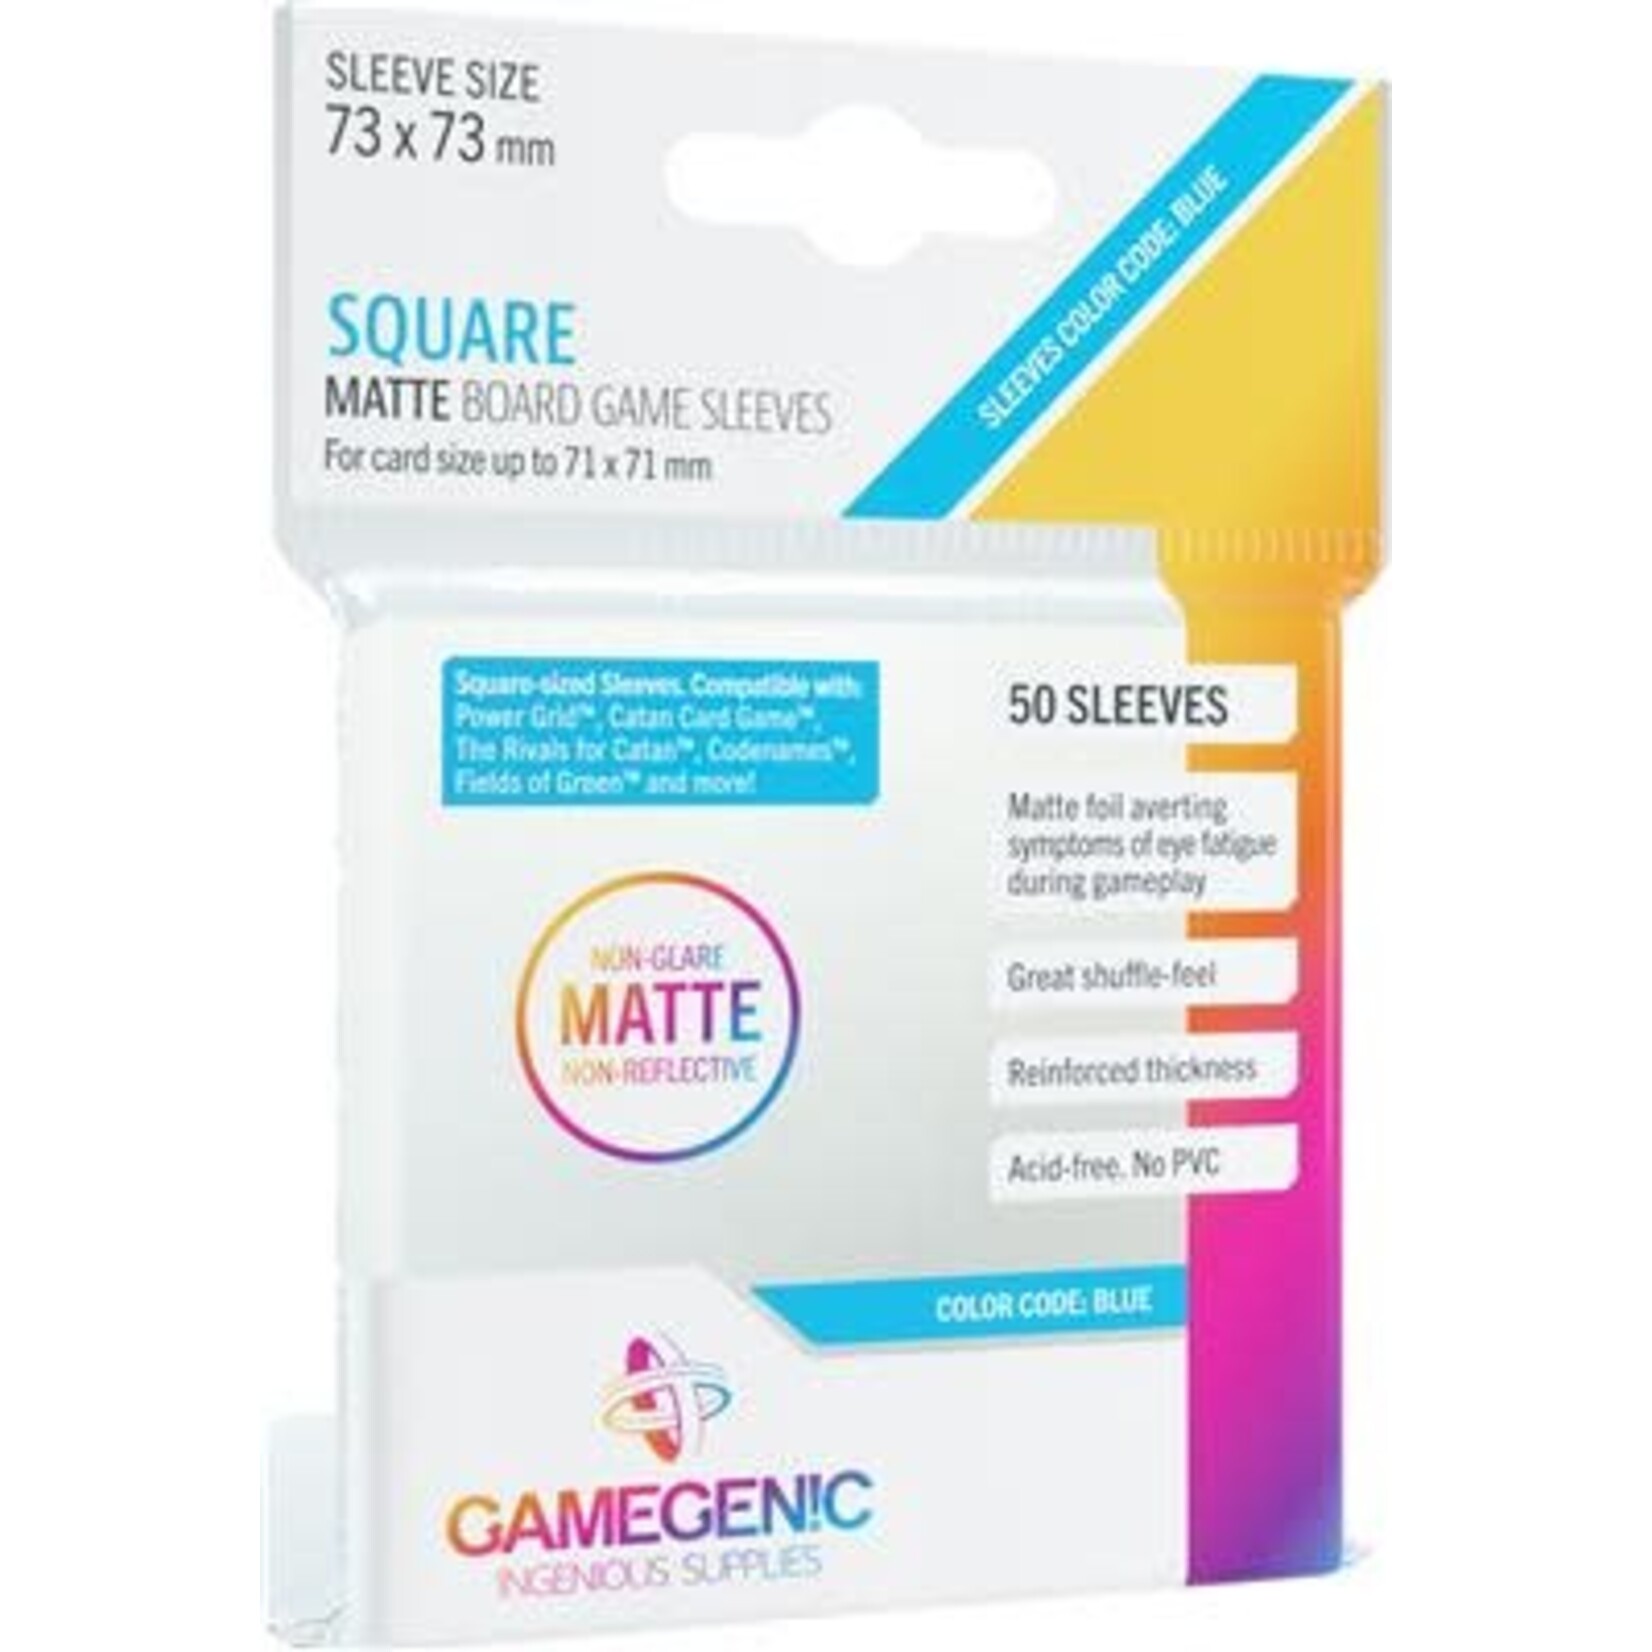 Gamegenic Board Game Sleeves - Square (73 x 73) Matte